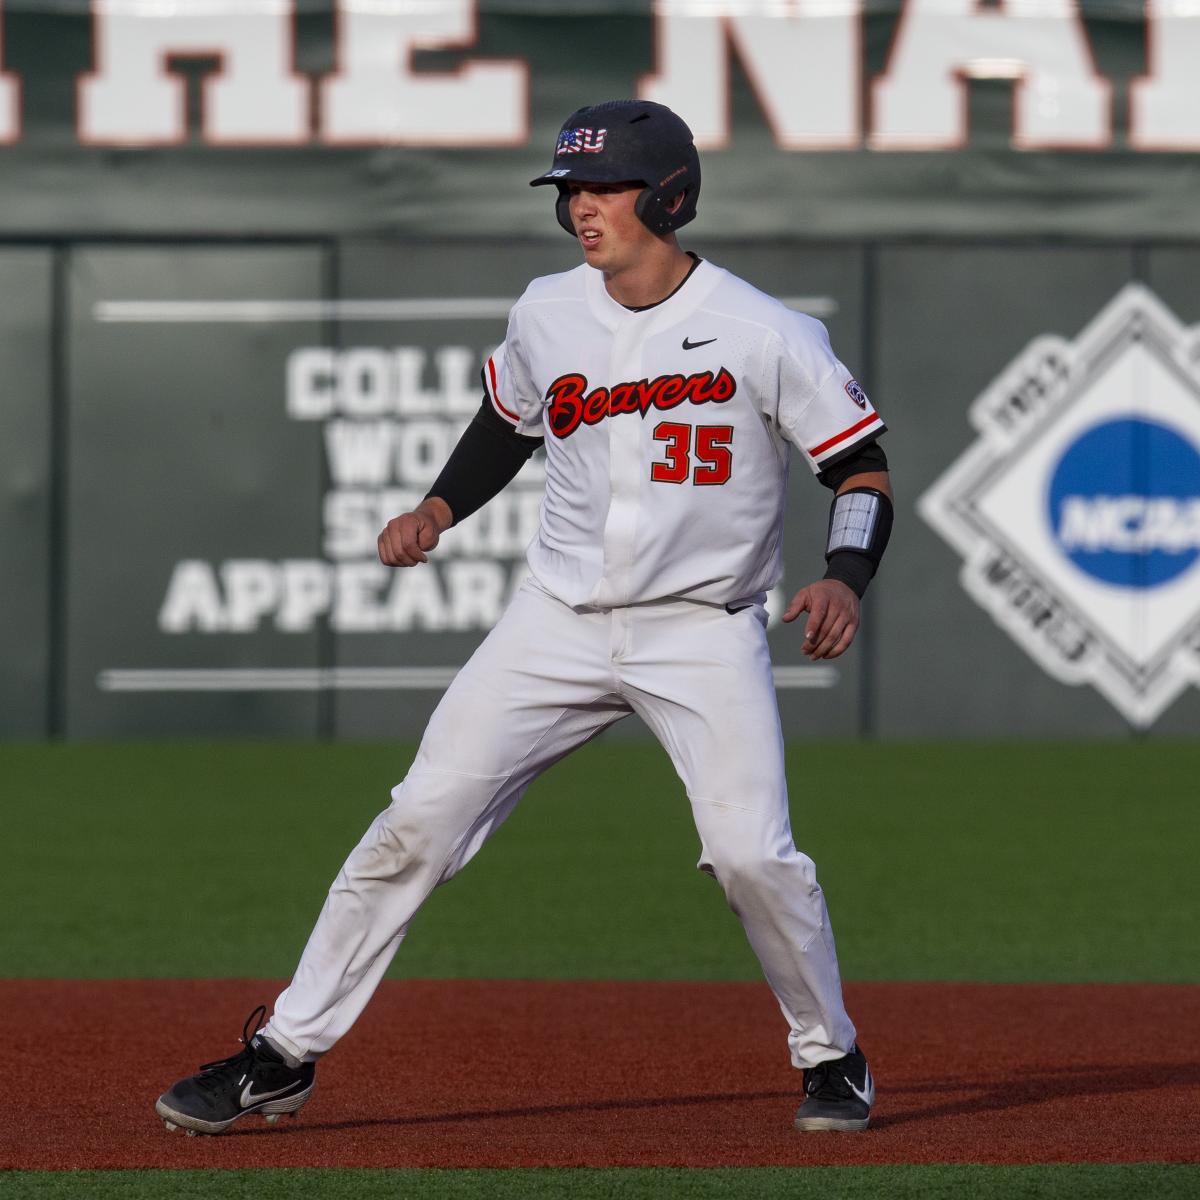 Jensen selected 27th overall by the Chicago Cubs in the 2019 MLB